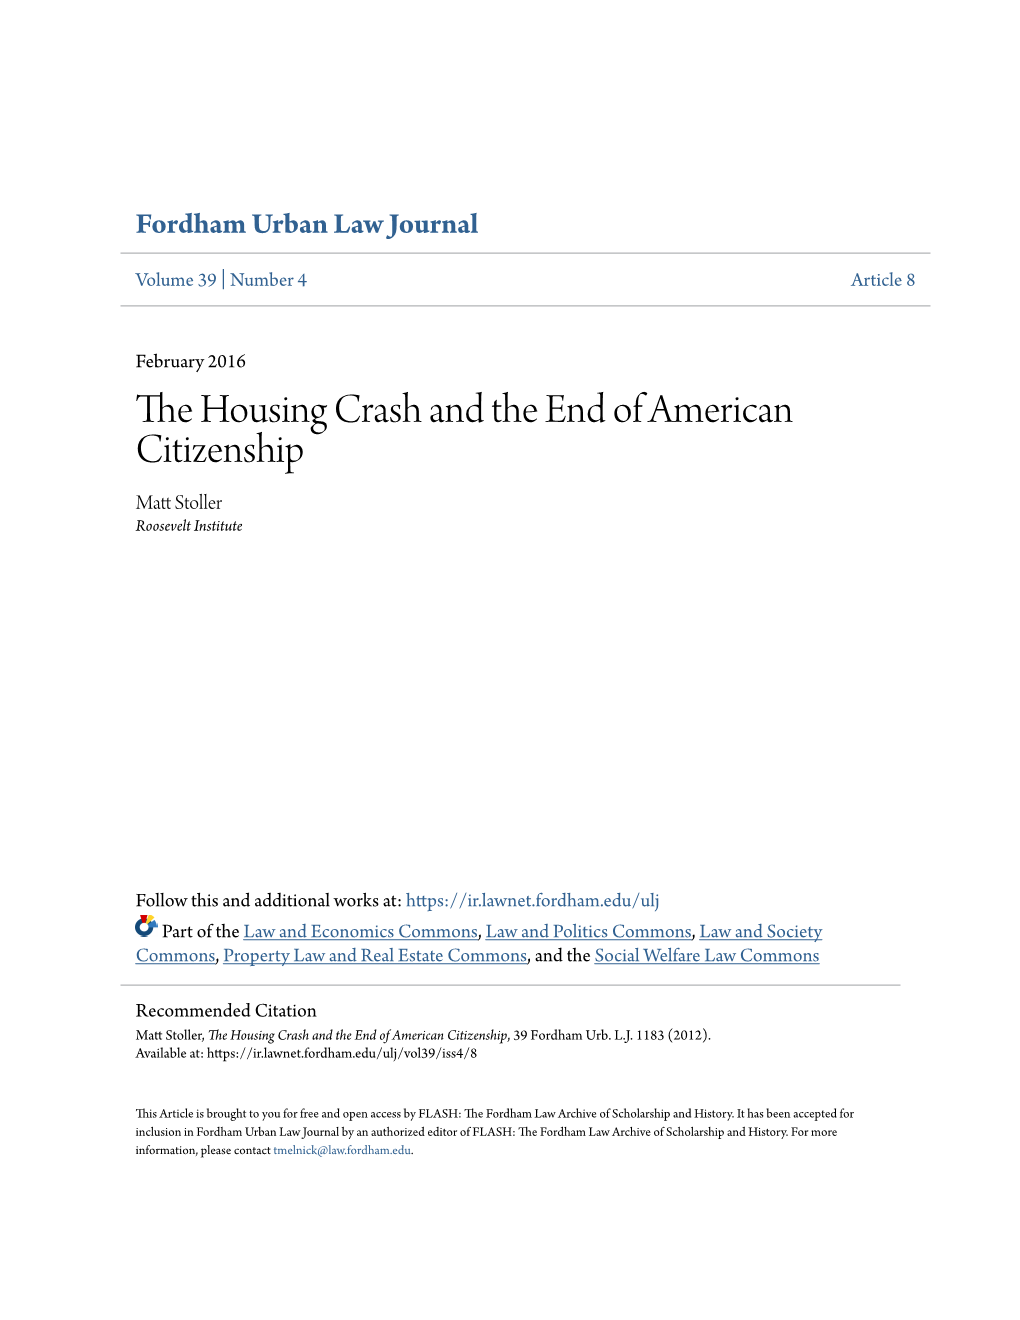 The Housing Crash and the End of American Citizenship, 39 Fordham Urb